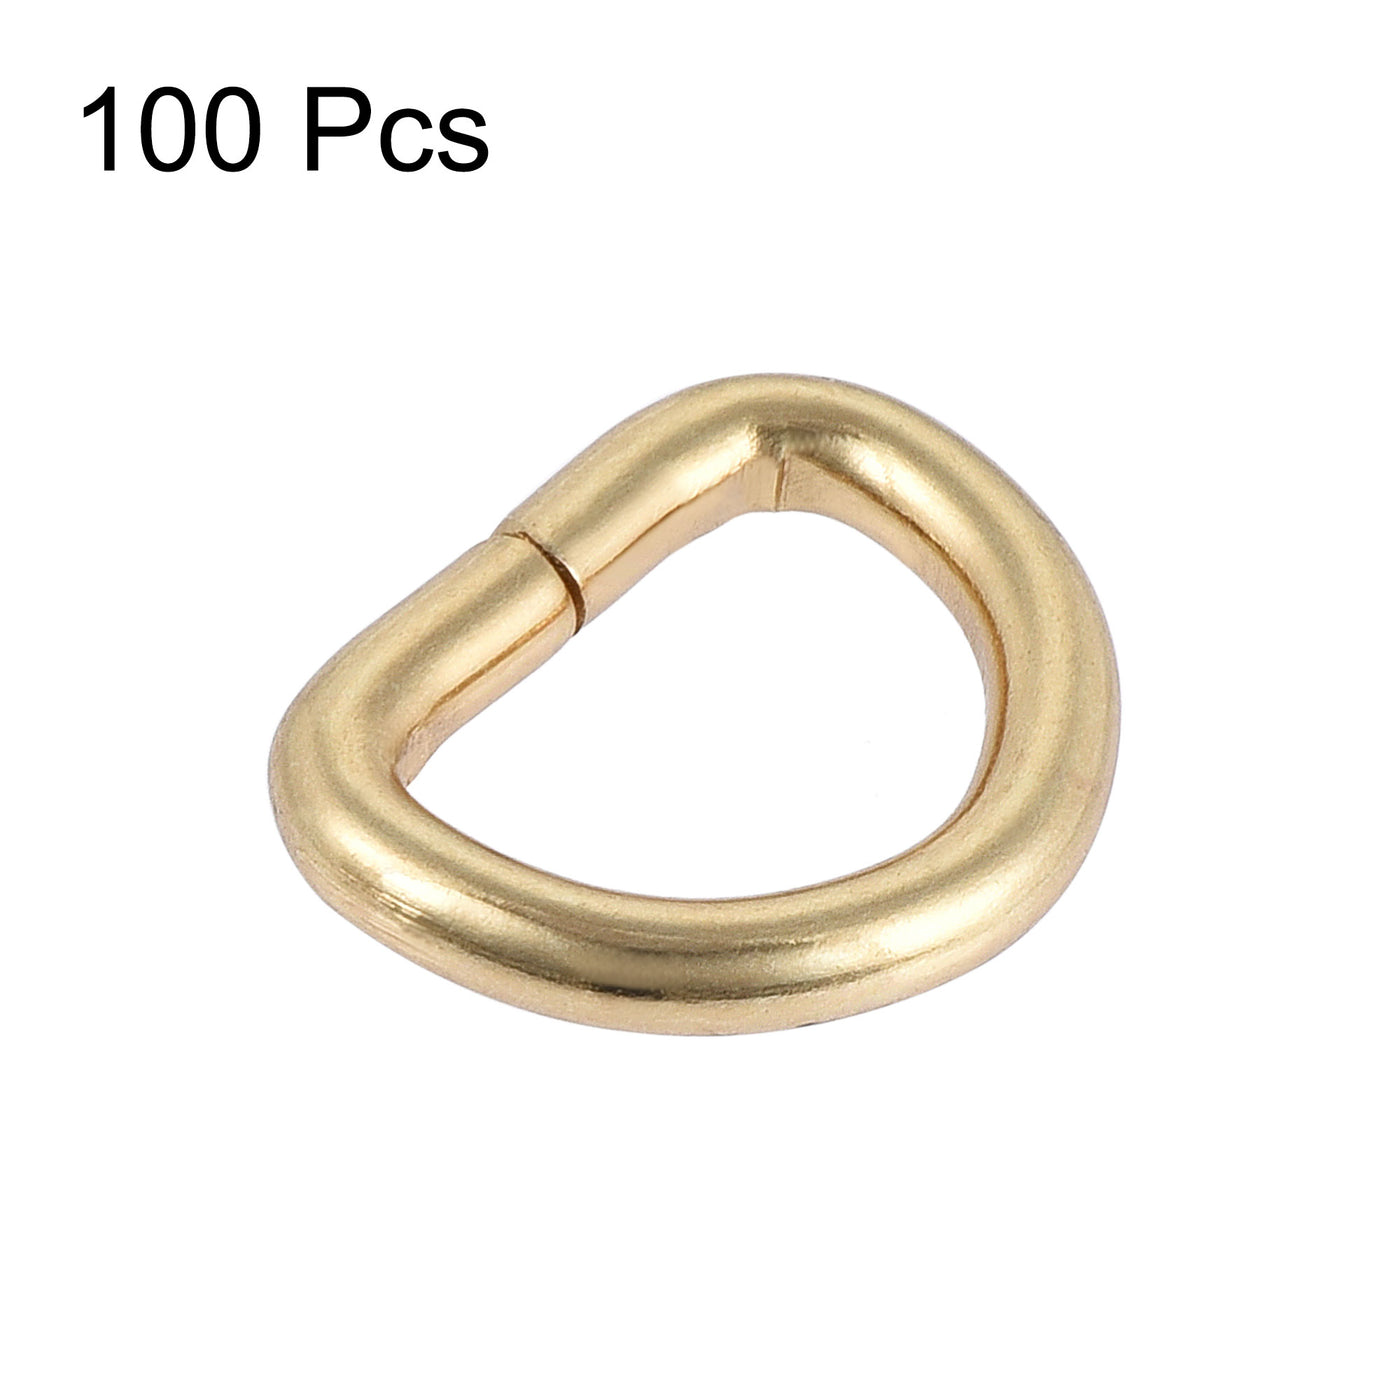 uxcell Uxcell Metal D Ring 0.51"(13mm) D-Rings Buckle for Hardware Bags Belts Craft DIY Accessories Gold Tone 100pcs